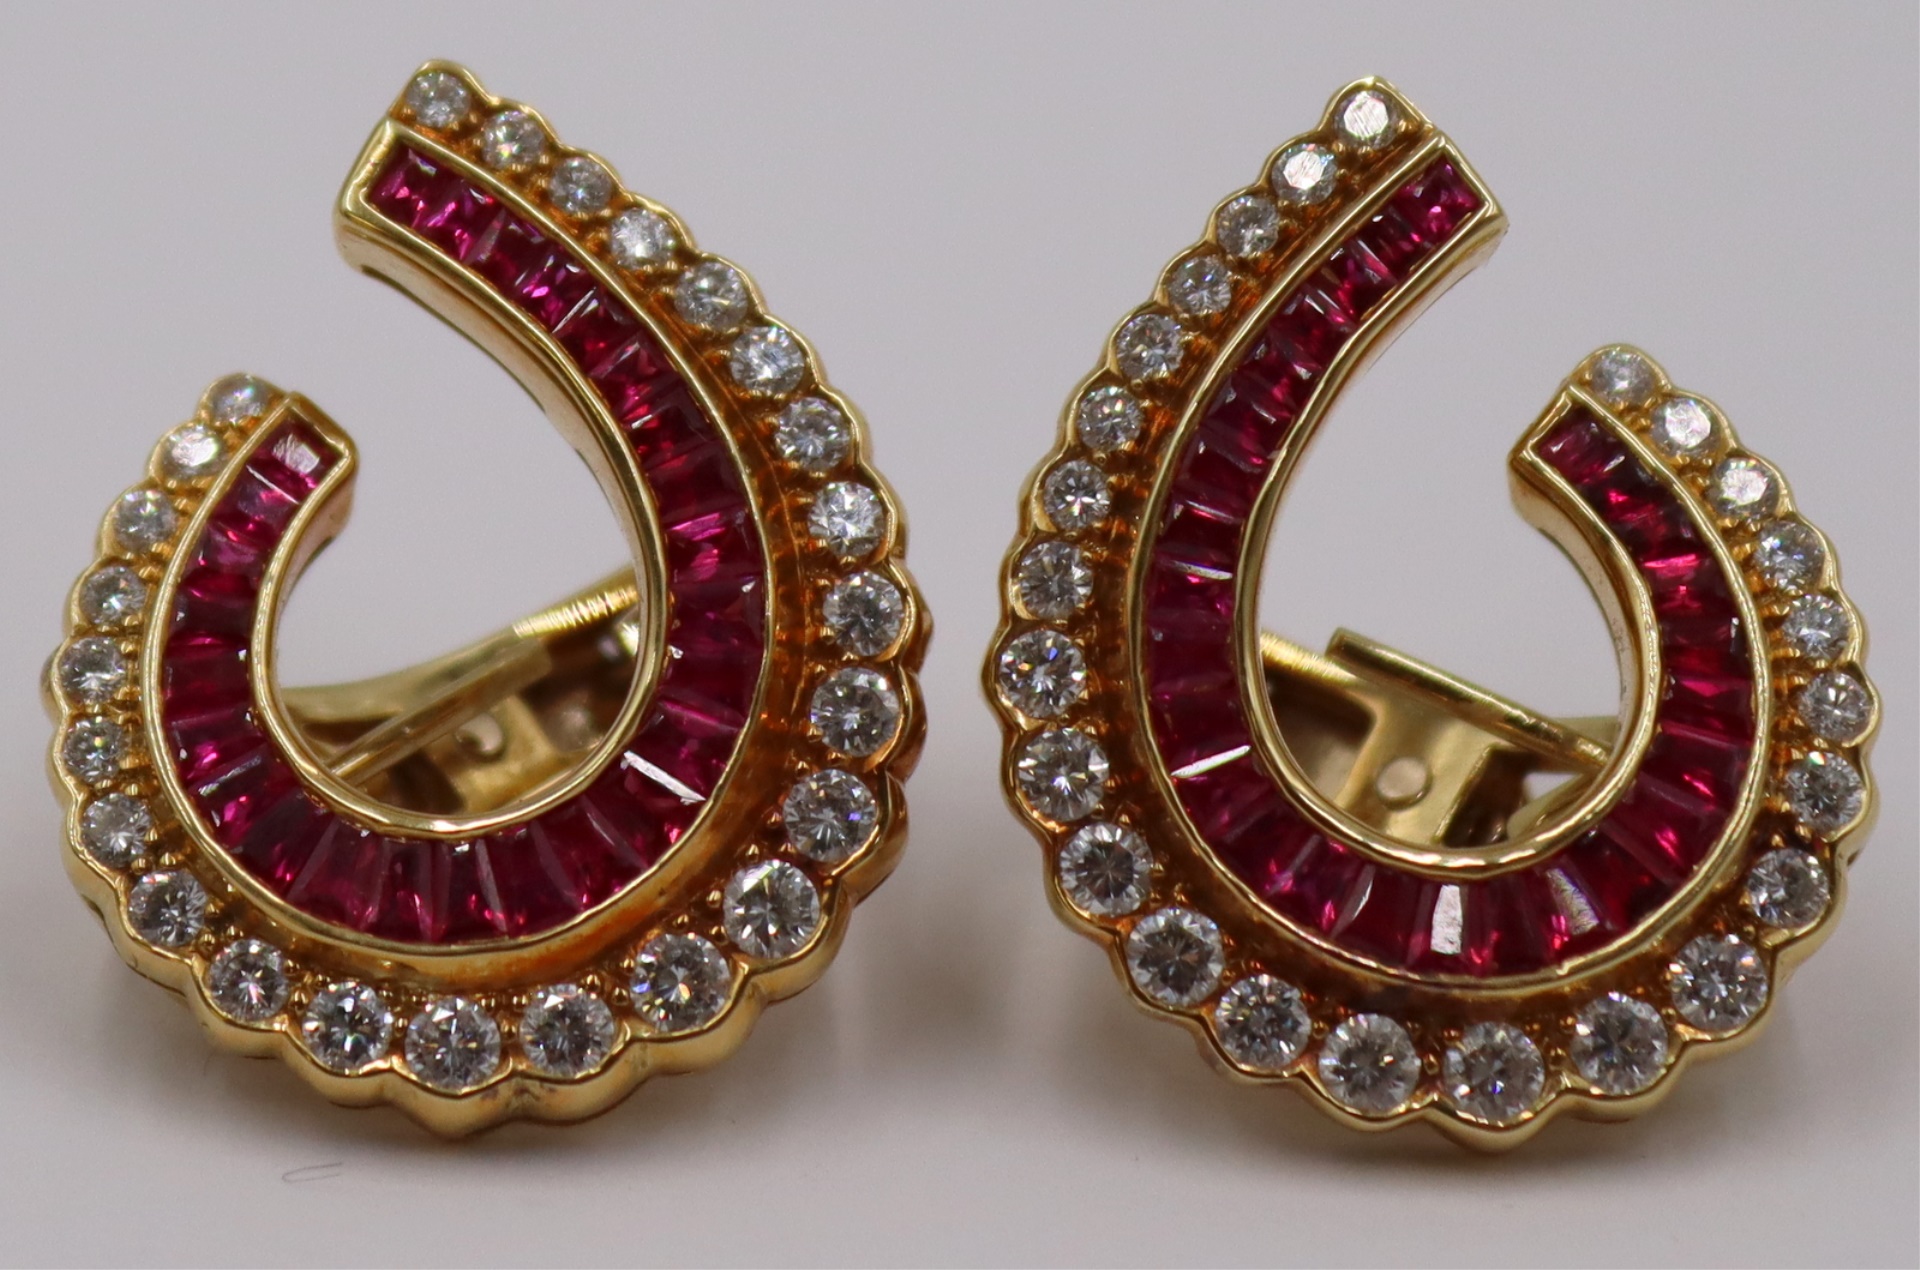 JEWELRY. PAIR OF 18KT GOLD, COLORED